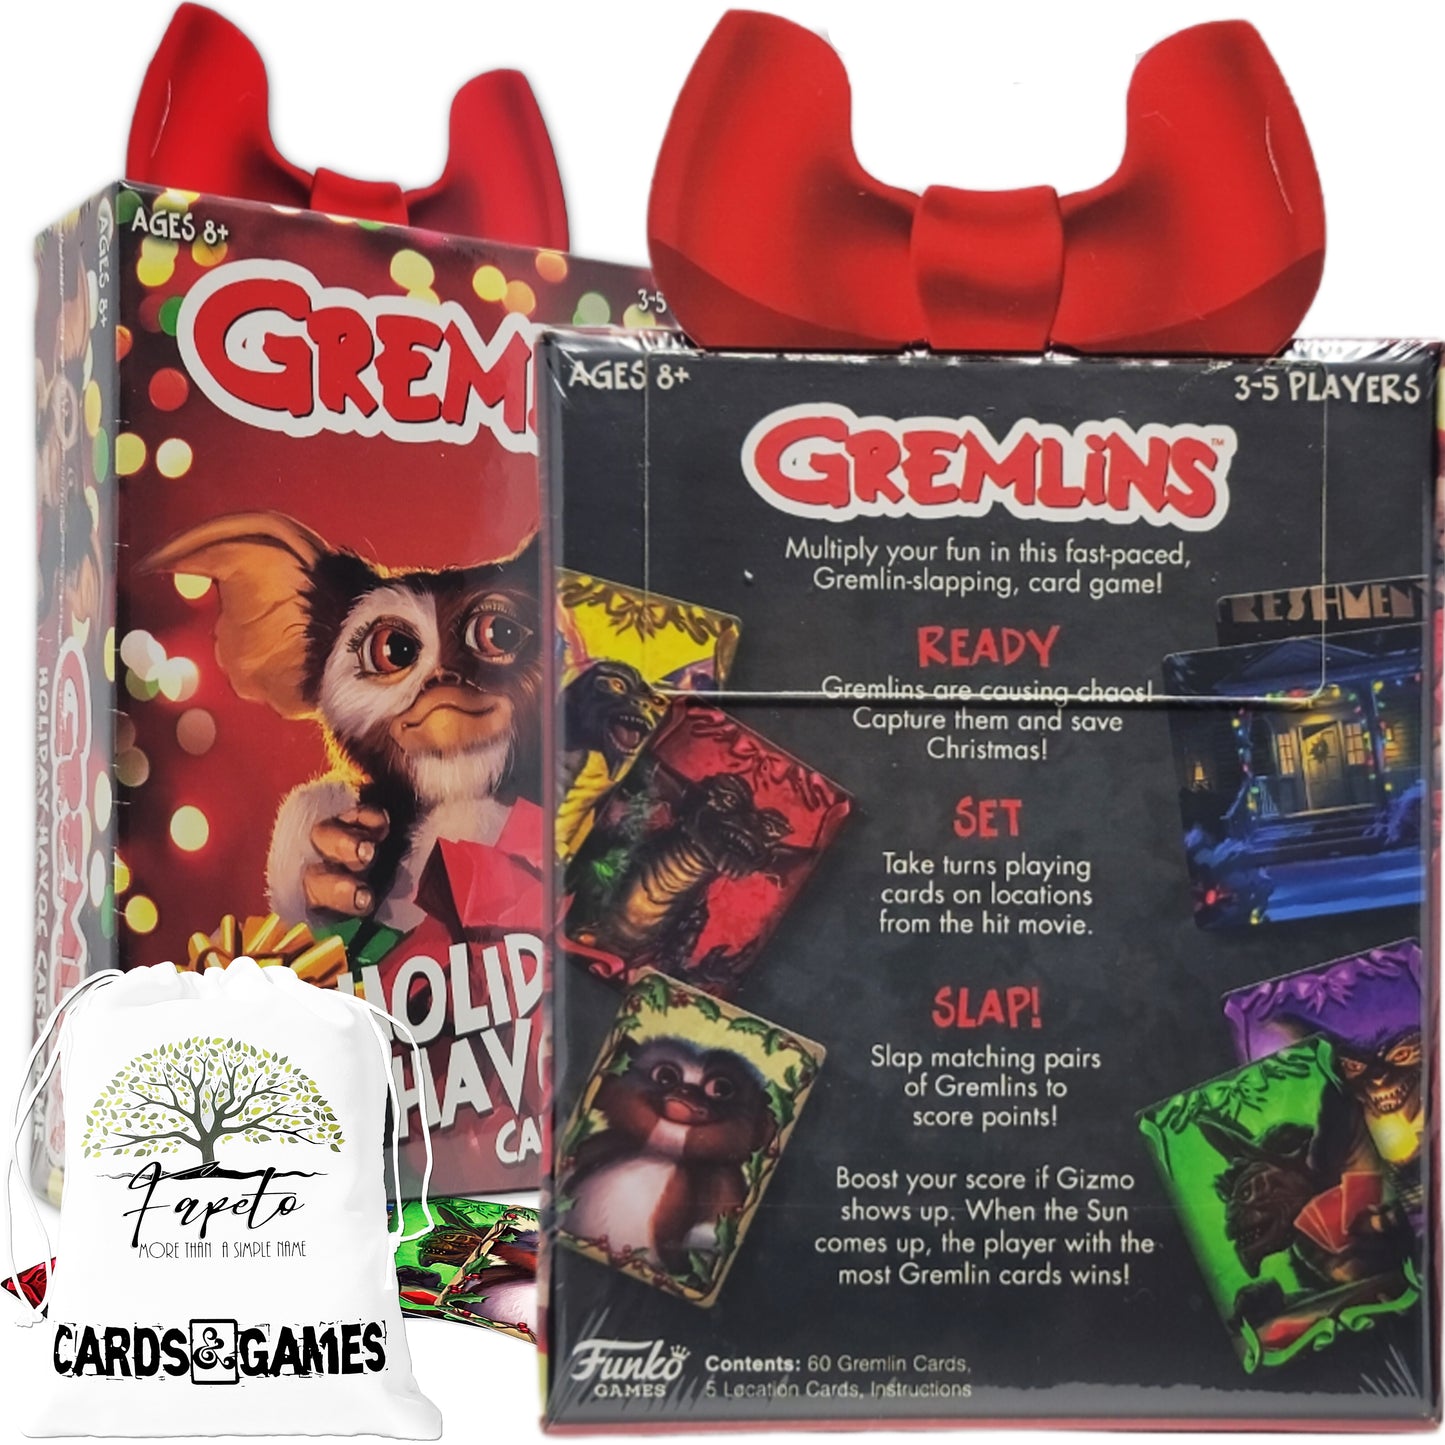 Family fast card game Gremlins - Holiday Havoc and Boo Hollow - Pumpkin Showdown with Random Color Drawstring Bag for party, travels and holidays